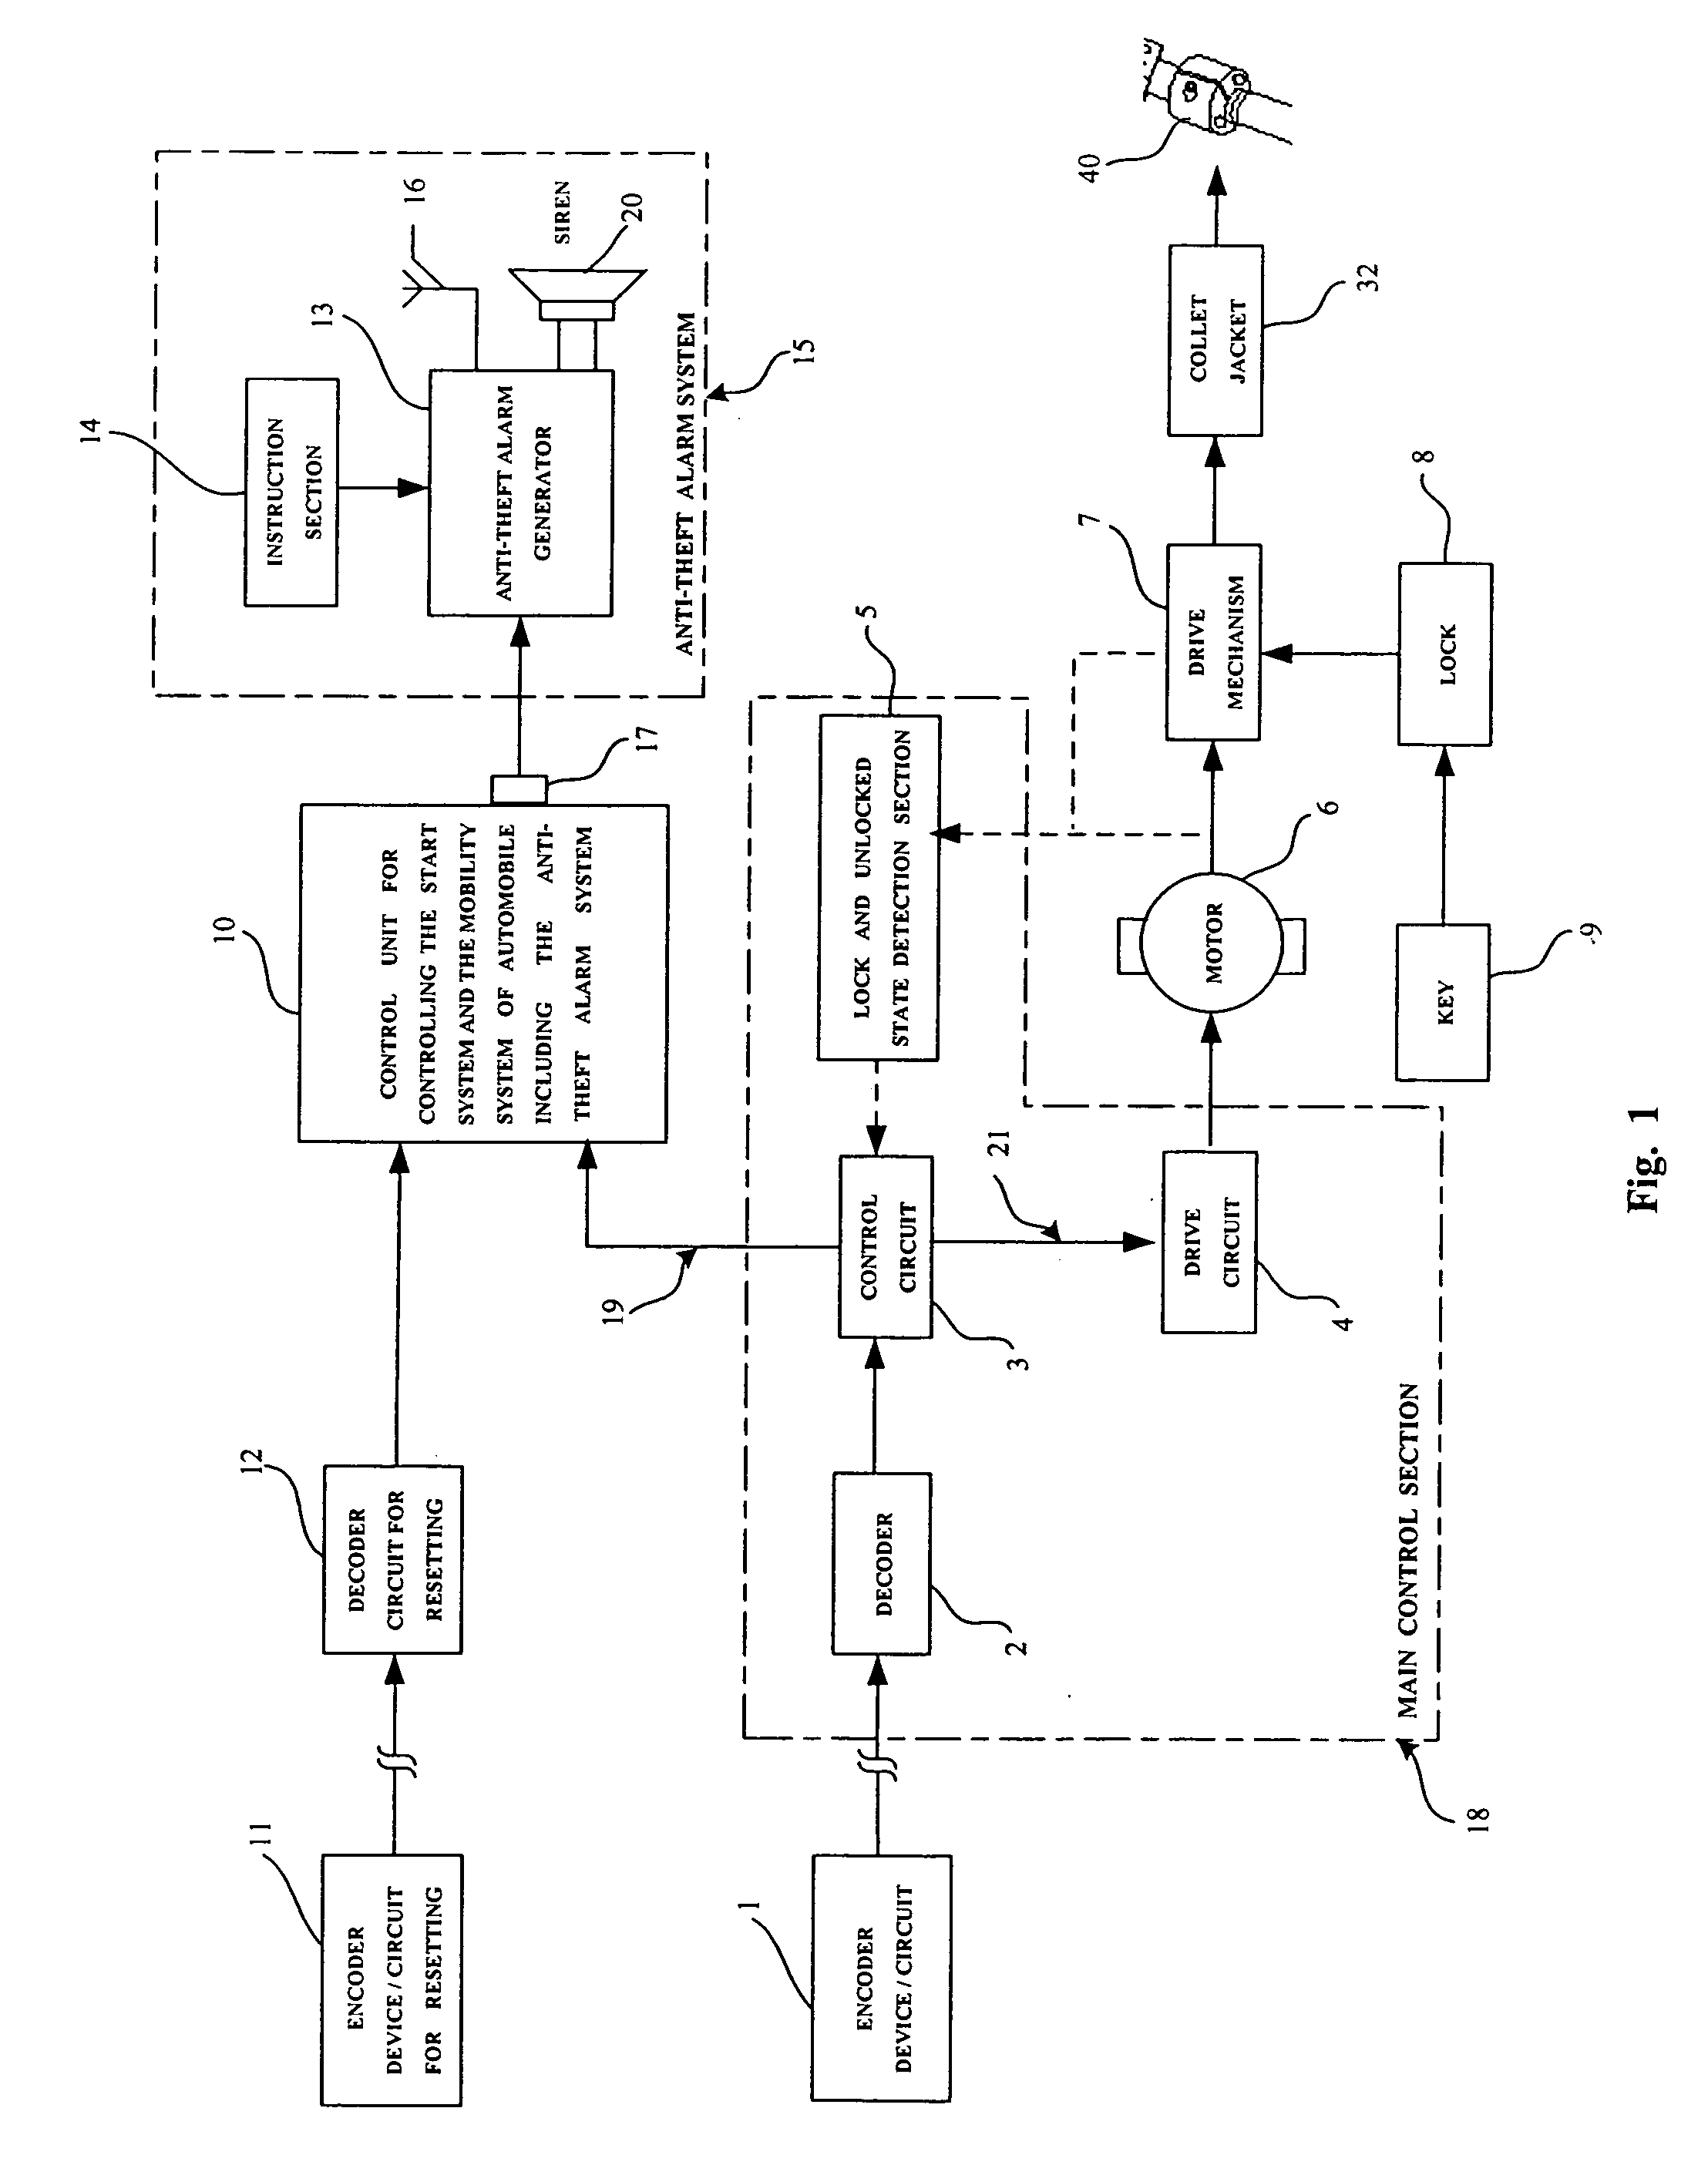 System and device for locking an automobile steering axis